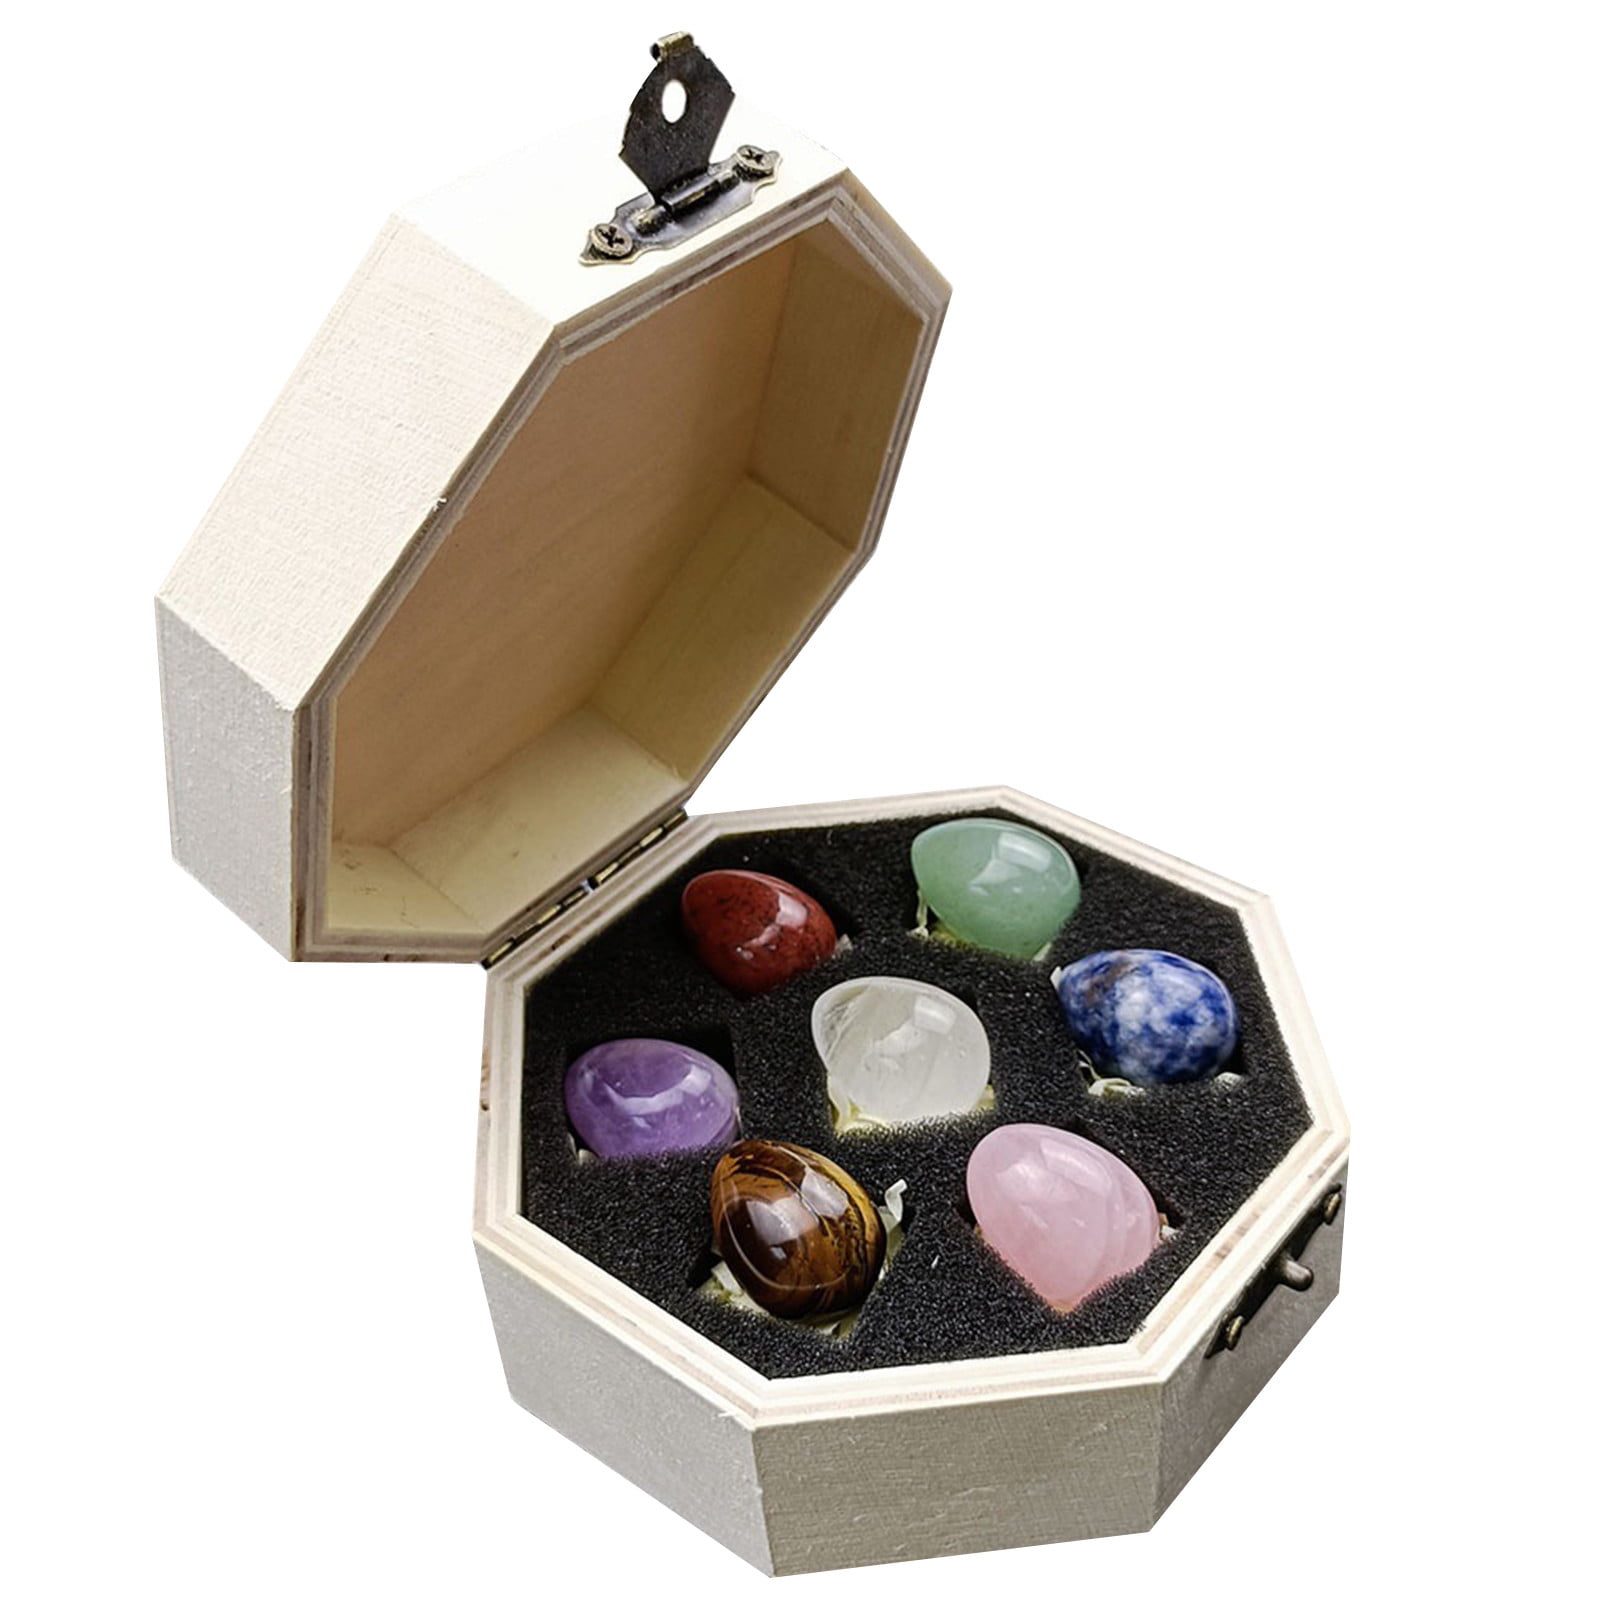 Christmas Saving Clearance! Sruiluo Crystal Set, Healing Crystals Set, Natural Colorful Crystal Jade Oval Set Oval Ornaments Colorful Stone Wooden Box Gift Box